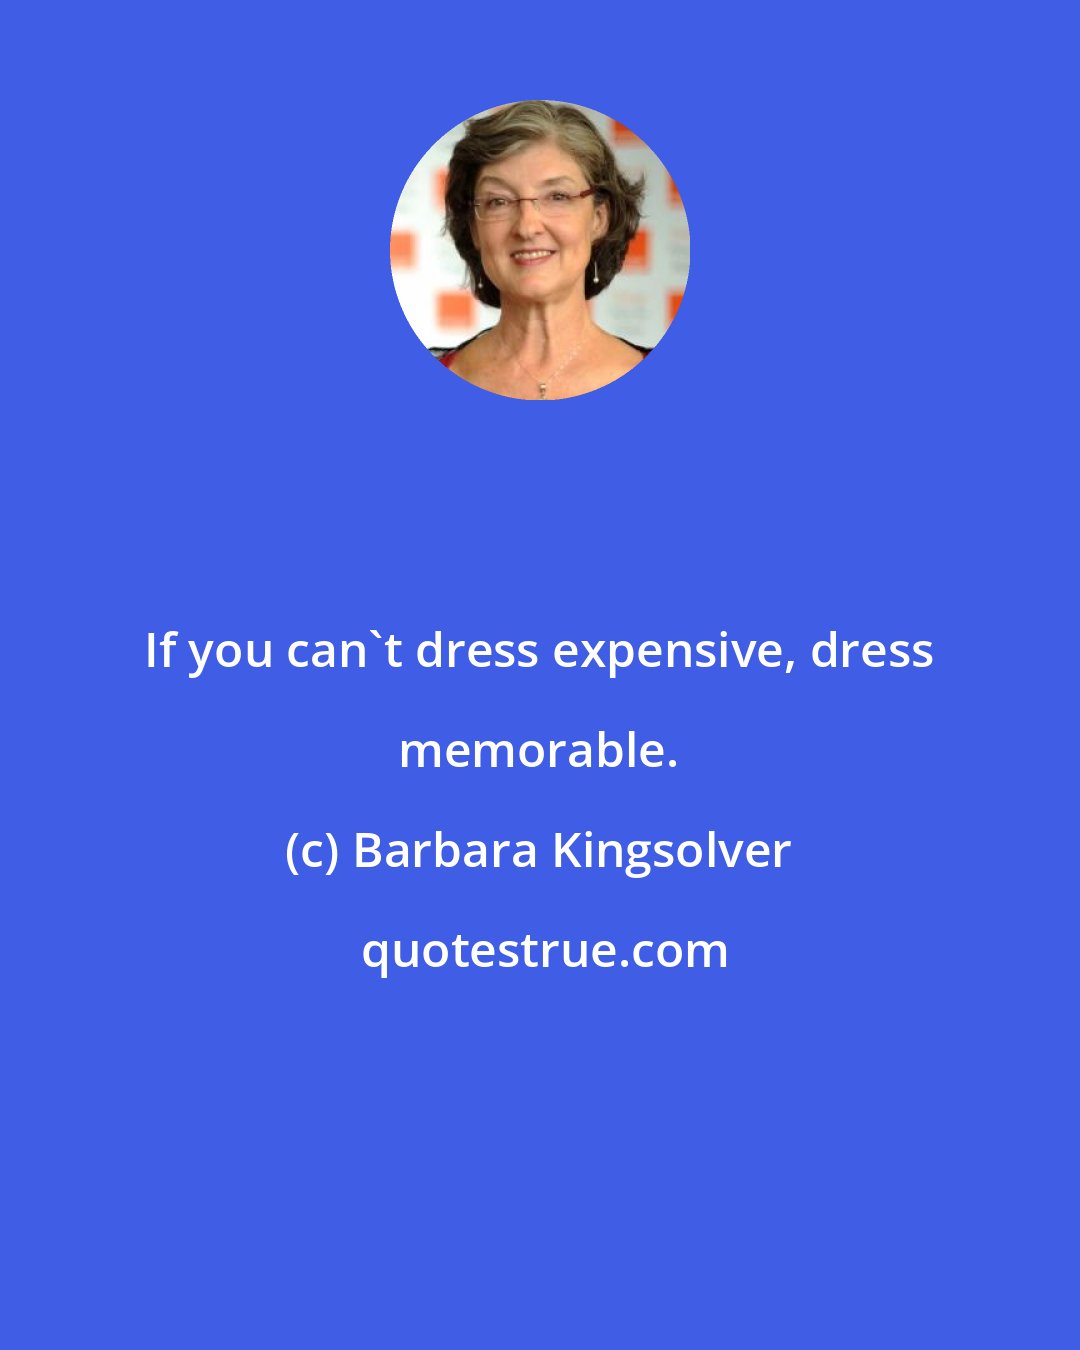 Barbara Kingsolver: If you can't dress expensive, dress memorable.